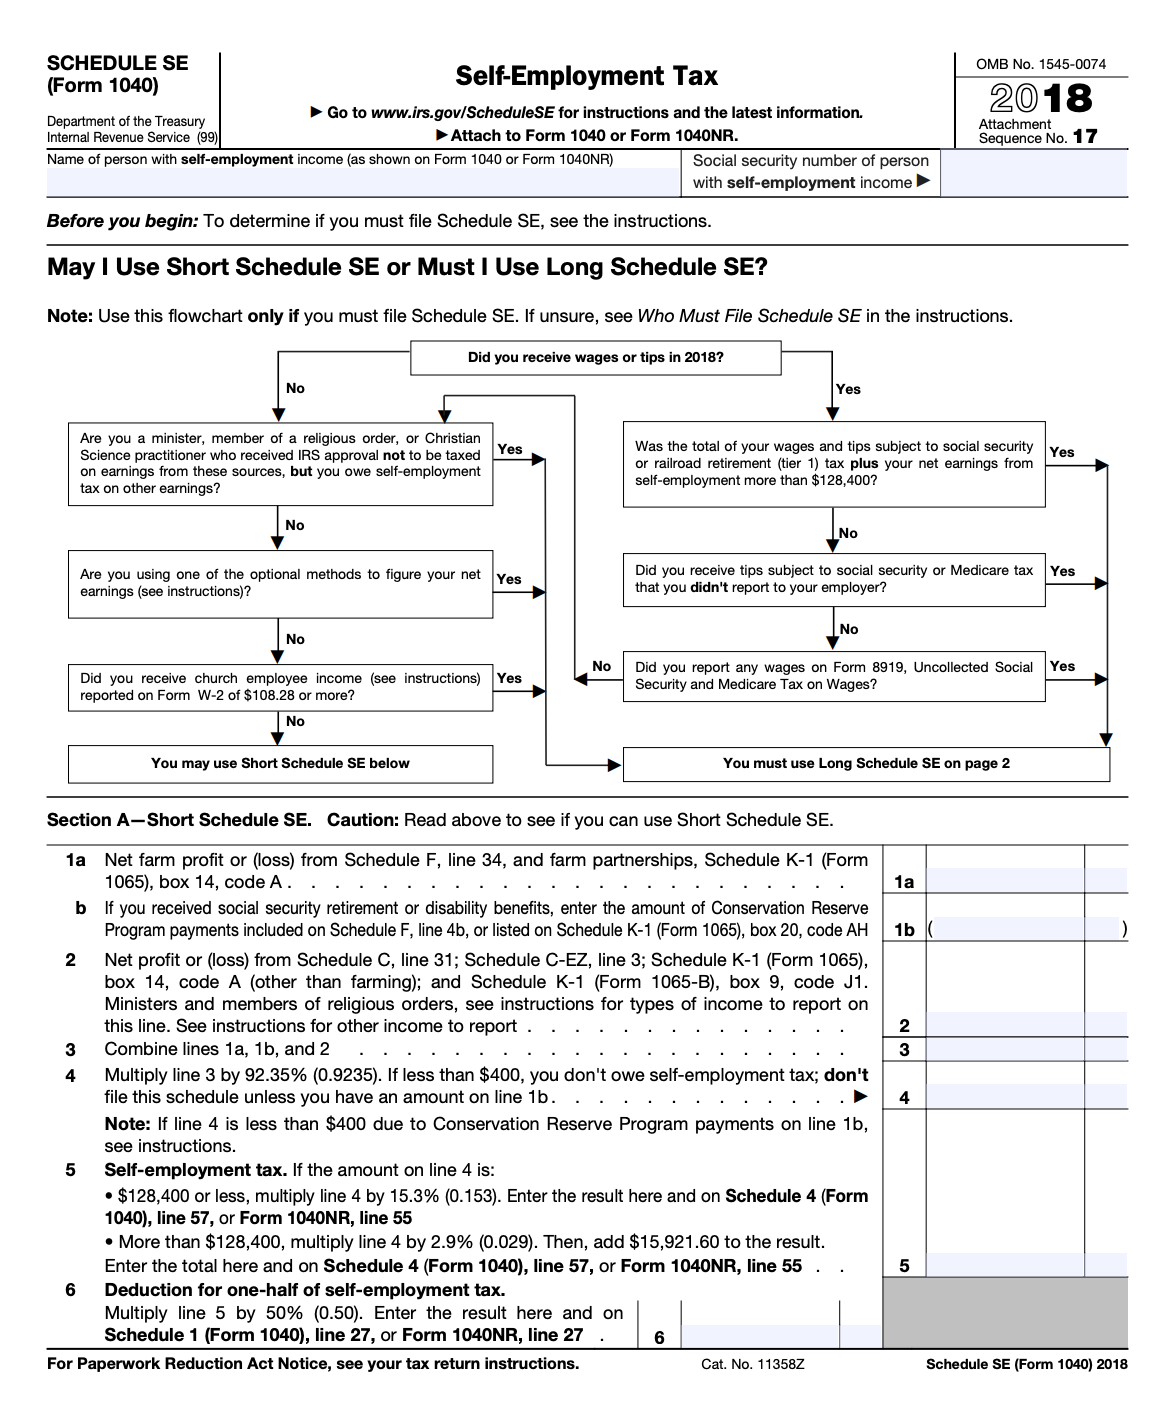 Schedule SE A Simple Guide to Filing the SelfEmployment Tax Form